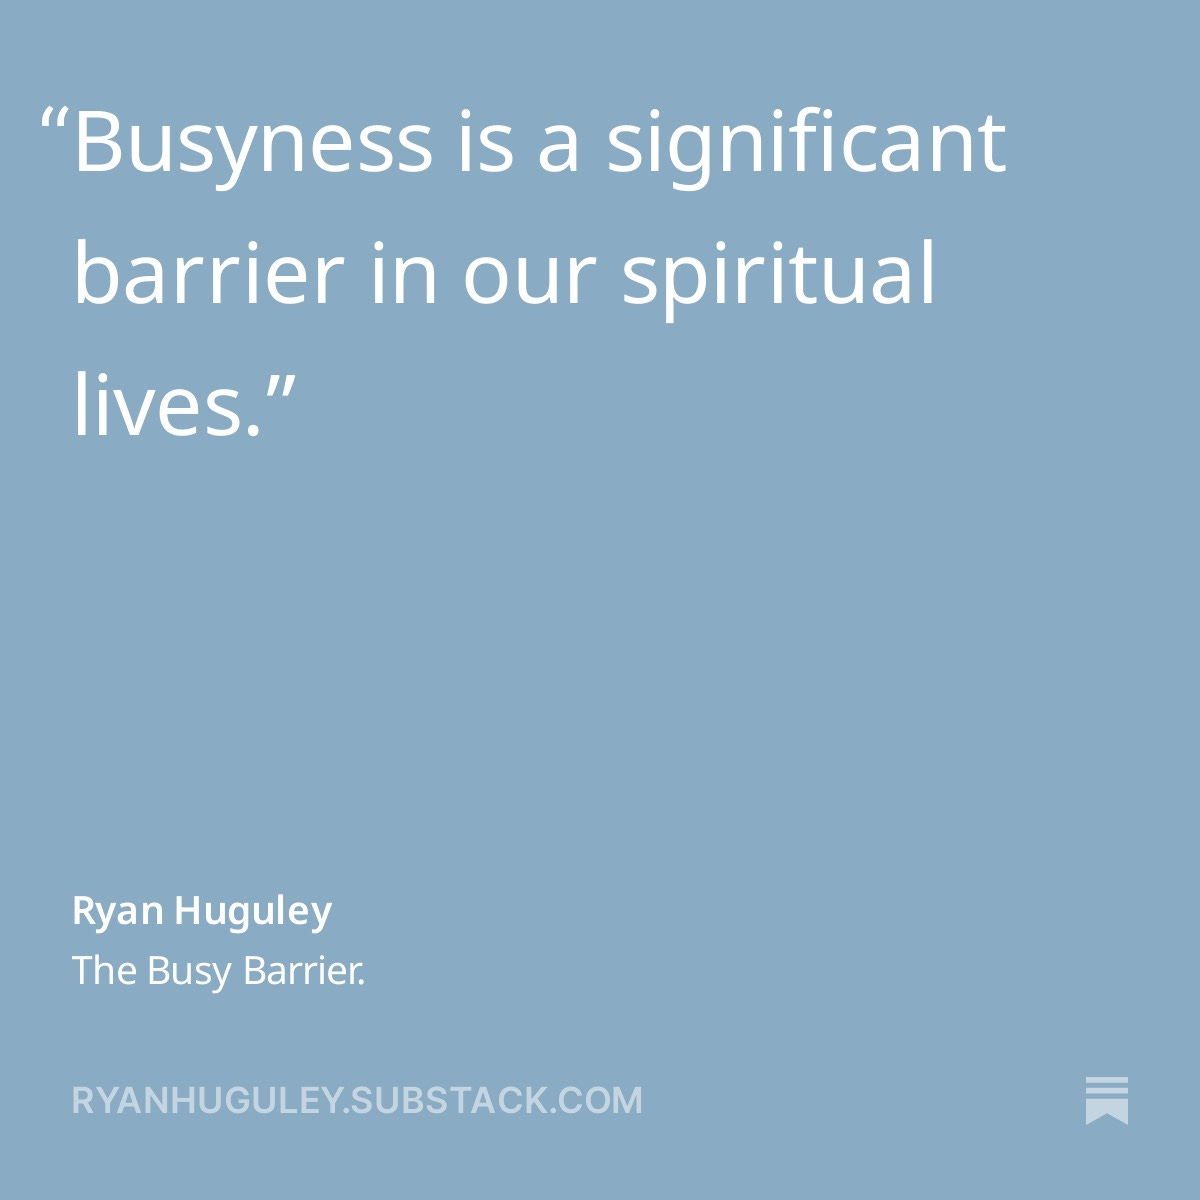 Ryan Huguley quote from The Busy Barrier article